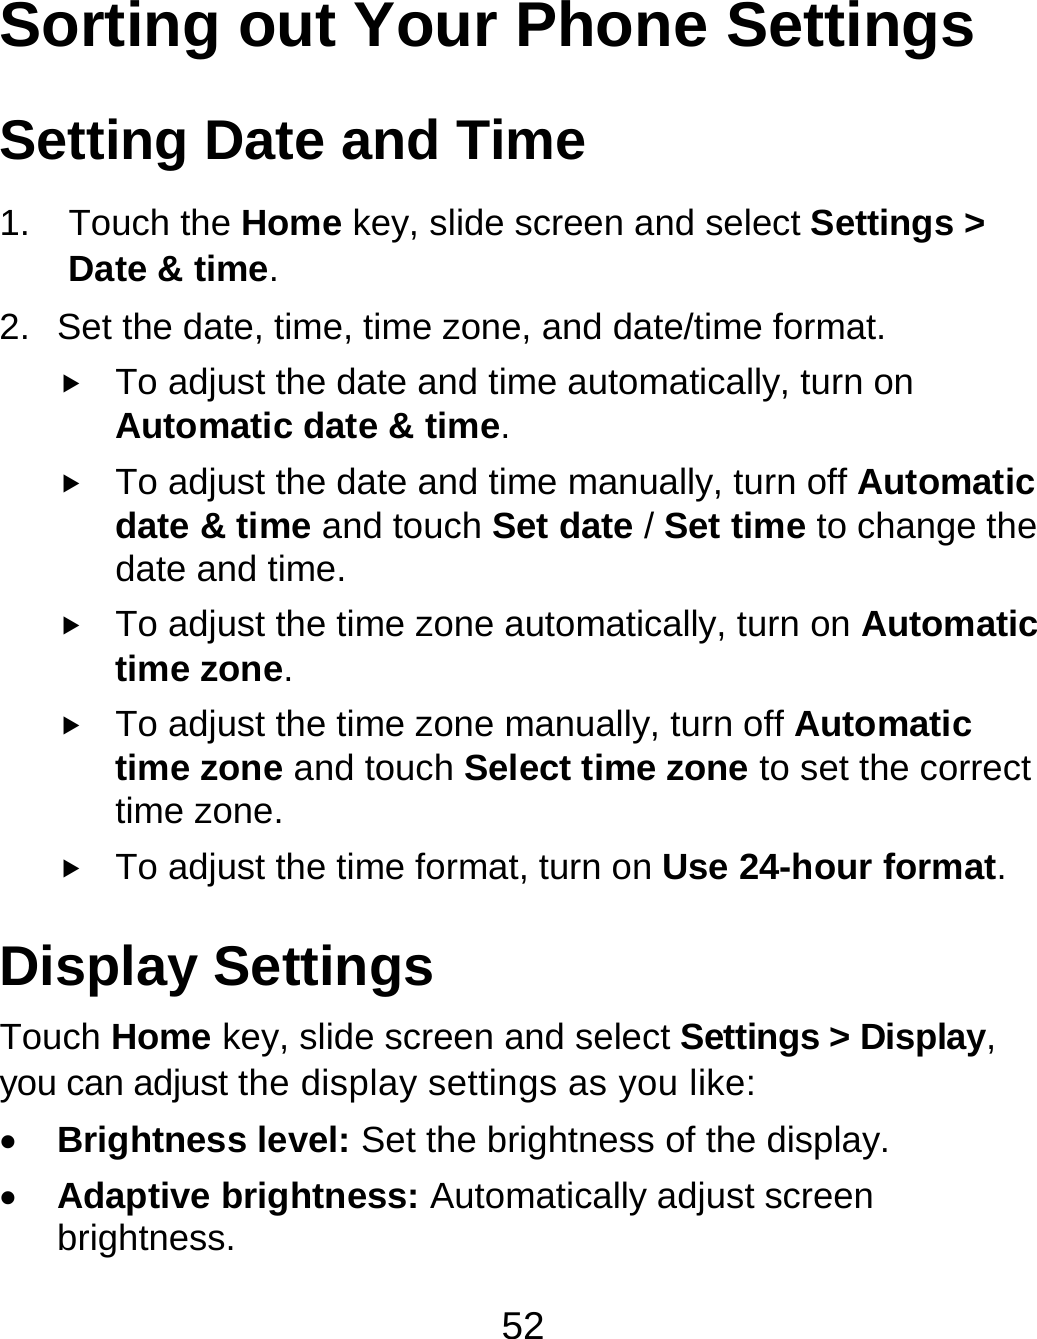 52 Sorting out Your Phone Settings Setting Date and Time 1. Touch the Home key, slide screen and select Settings &gt; Date &amp; time. 2.  Set the date, time, time zone, and date/time format.  To adjust the date and time automatically, turn on Automatic date &amp; time.  To adjust the date and time manually, turn off Automatic date &amp; time and touch Set date / Set time to change the date and time.  To adjust the time zone automatically, turn on Automatic time zone.  To adjust the time zone manually, turn off Automatic time zone and touch Select time zone to set the correct time zone.  To adjust the time format, turn on Use 24-hour format. Display Settings Touch Home key, slide screen and select Settings &gt; Display, you can adjust the display settings as you like:  Brightness level: Set the brightness of the display.  Adaptive brightness: Automatically adjust screen brightness. 